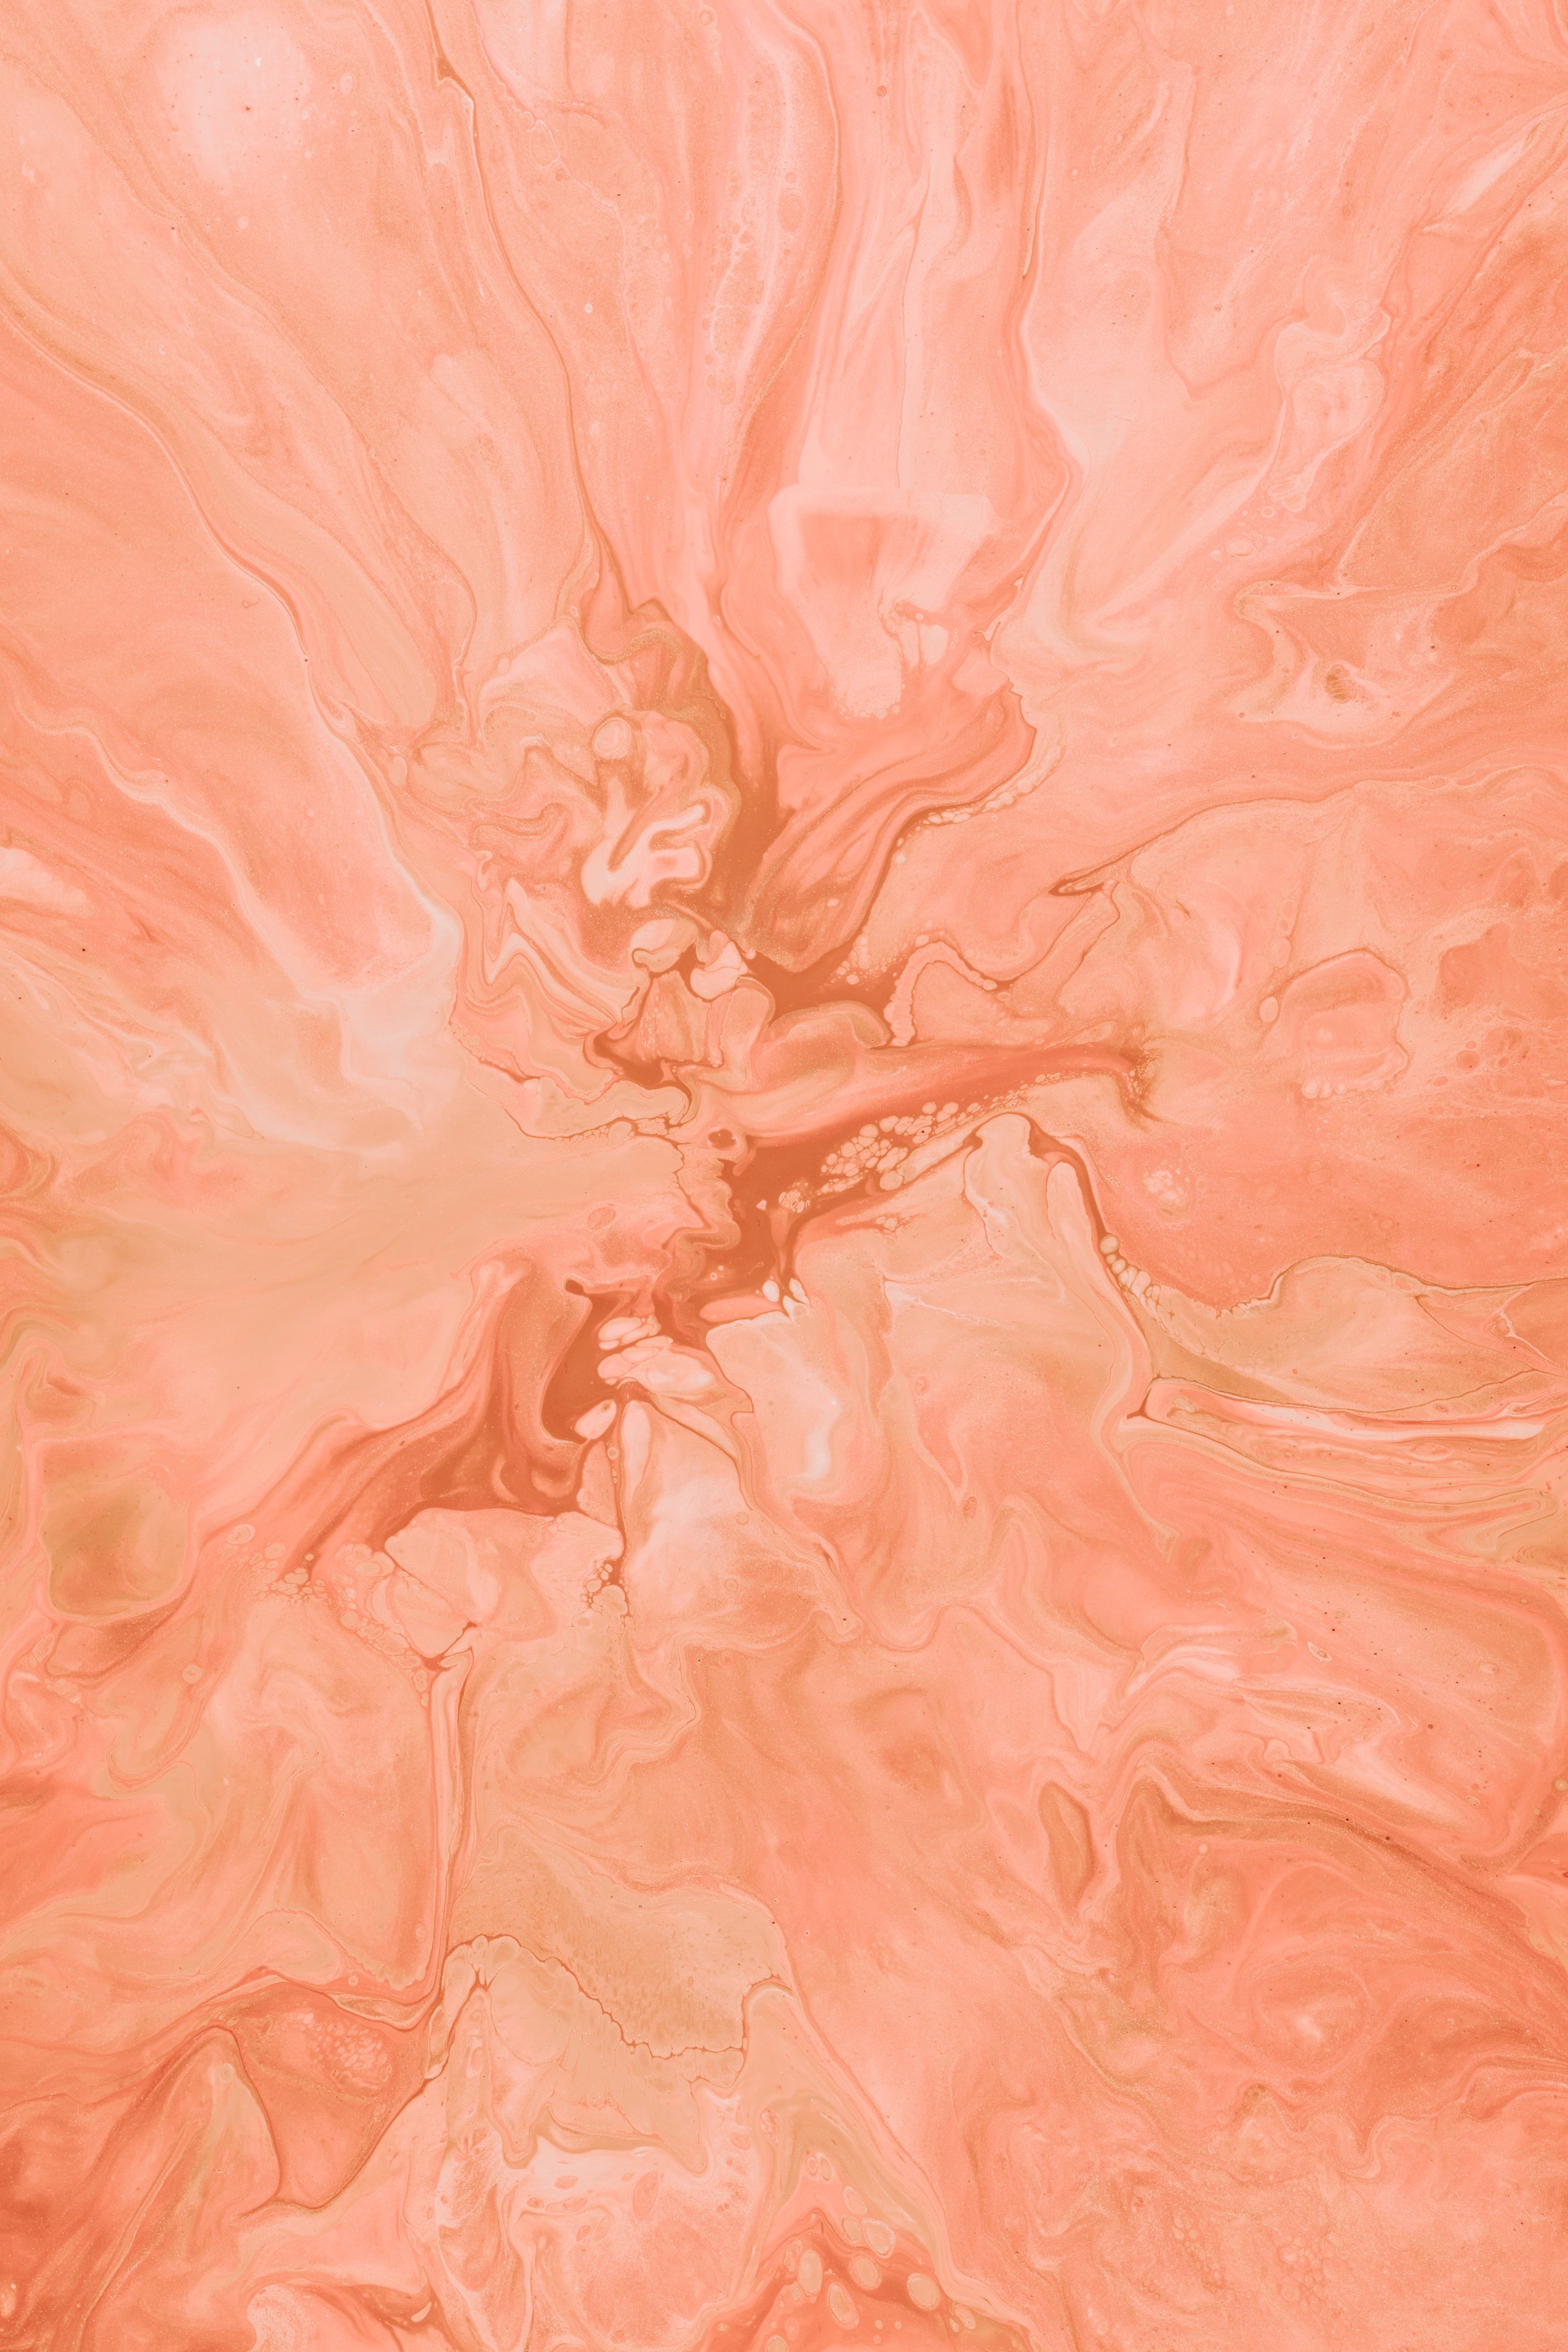 Fluid Art wallpaper for desktop, download free Fluid Art picture and background for PC